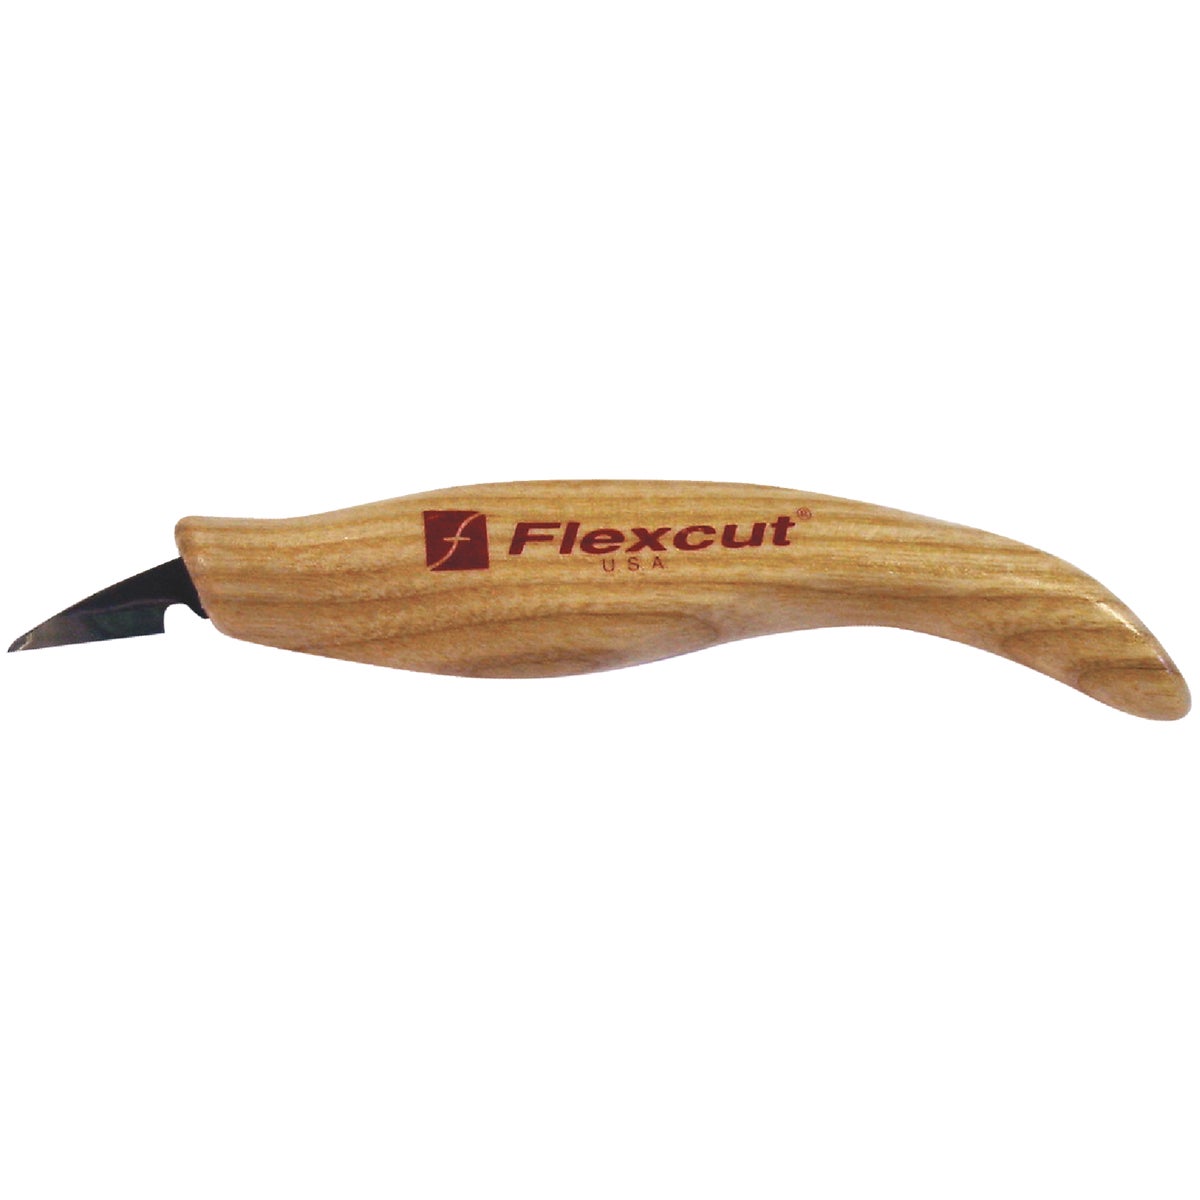 Flex Cut Mini-Detail Carving Knife with 3/4 In. Blade